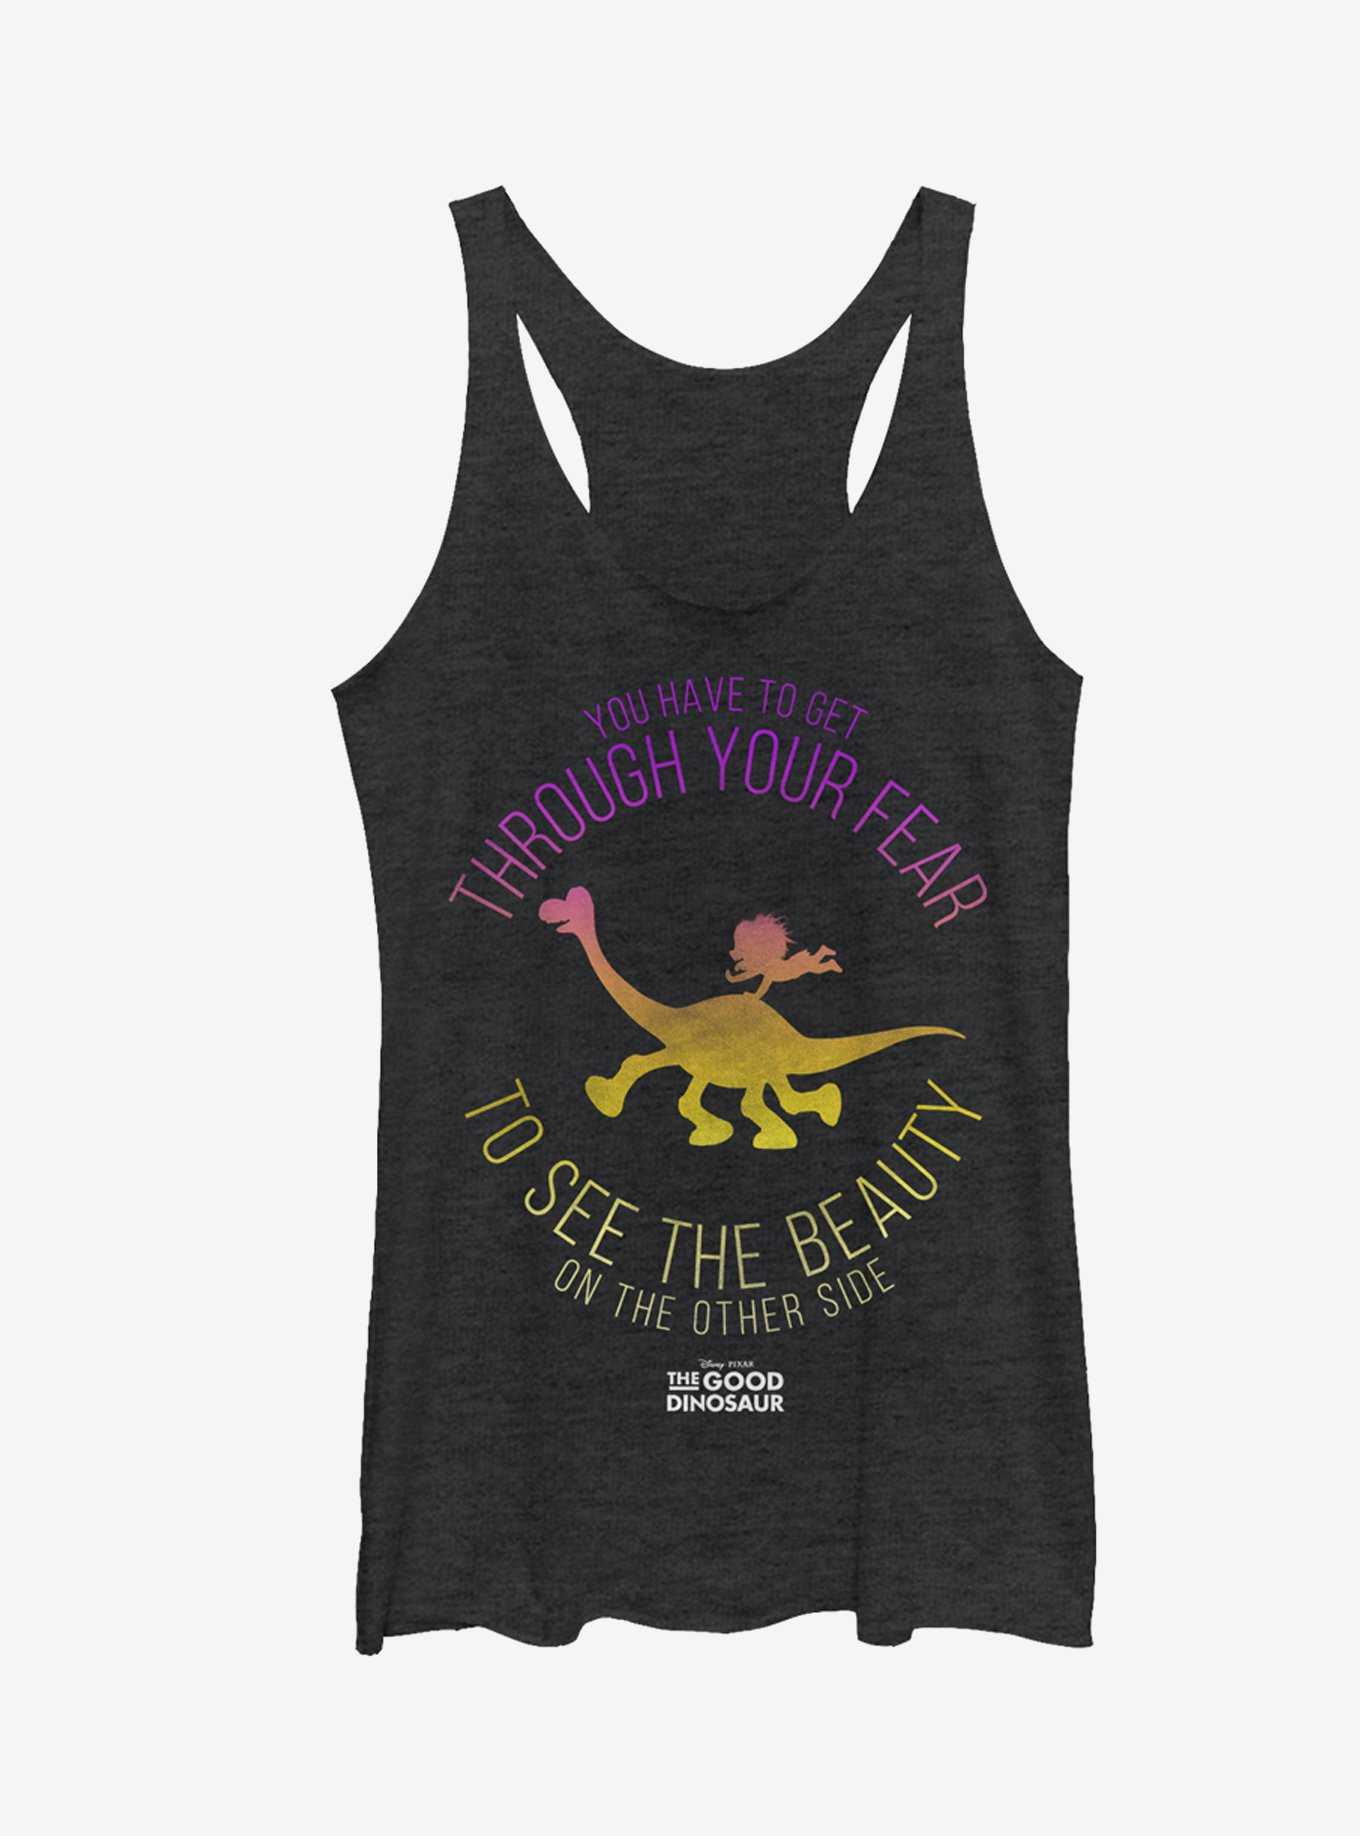 Disney Pixar The Good Dinosaur See the Beauty on the Other Side Girls Tanks, , hi-res